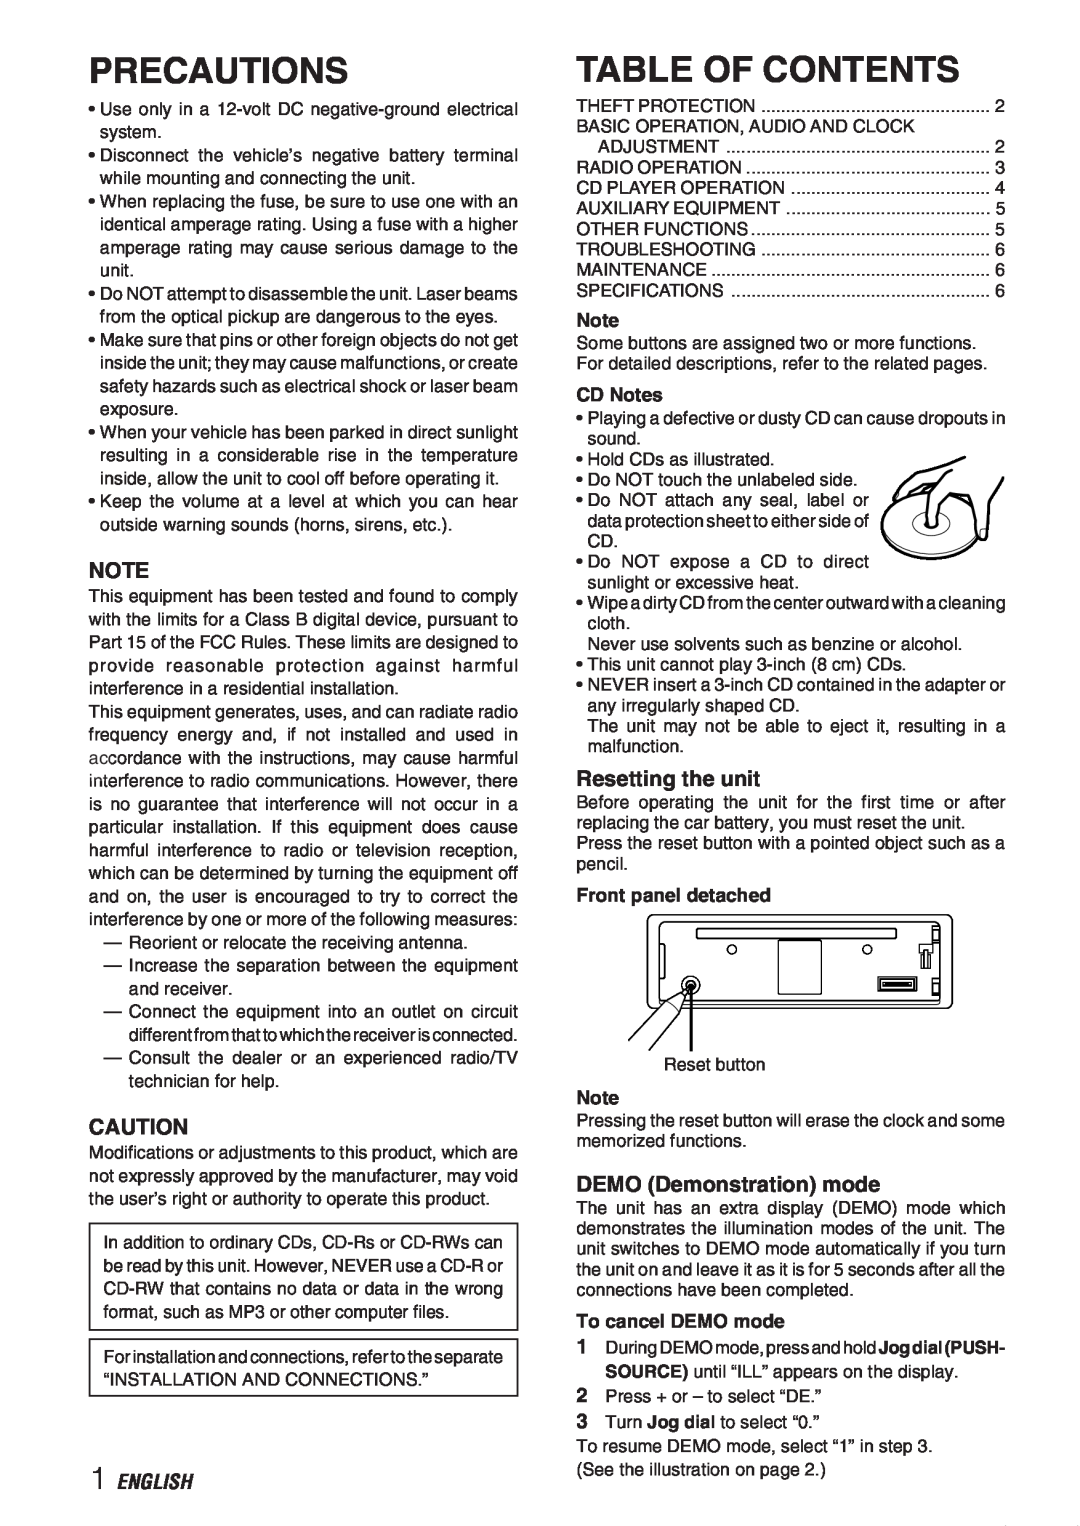 Aiwa CDC-X237 manual Precautions, Table Of Contents, English, Resetting the unit, DEMO Demonstration mode, CD Notes 